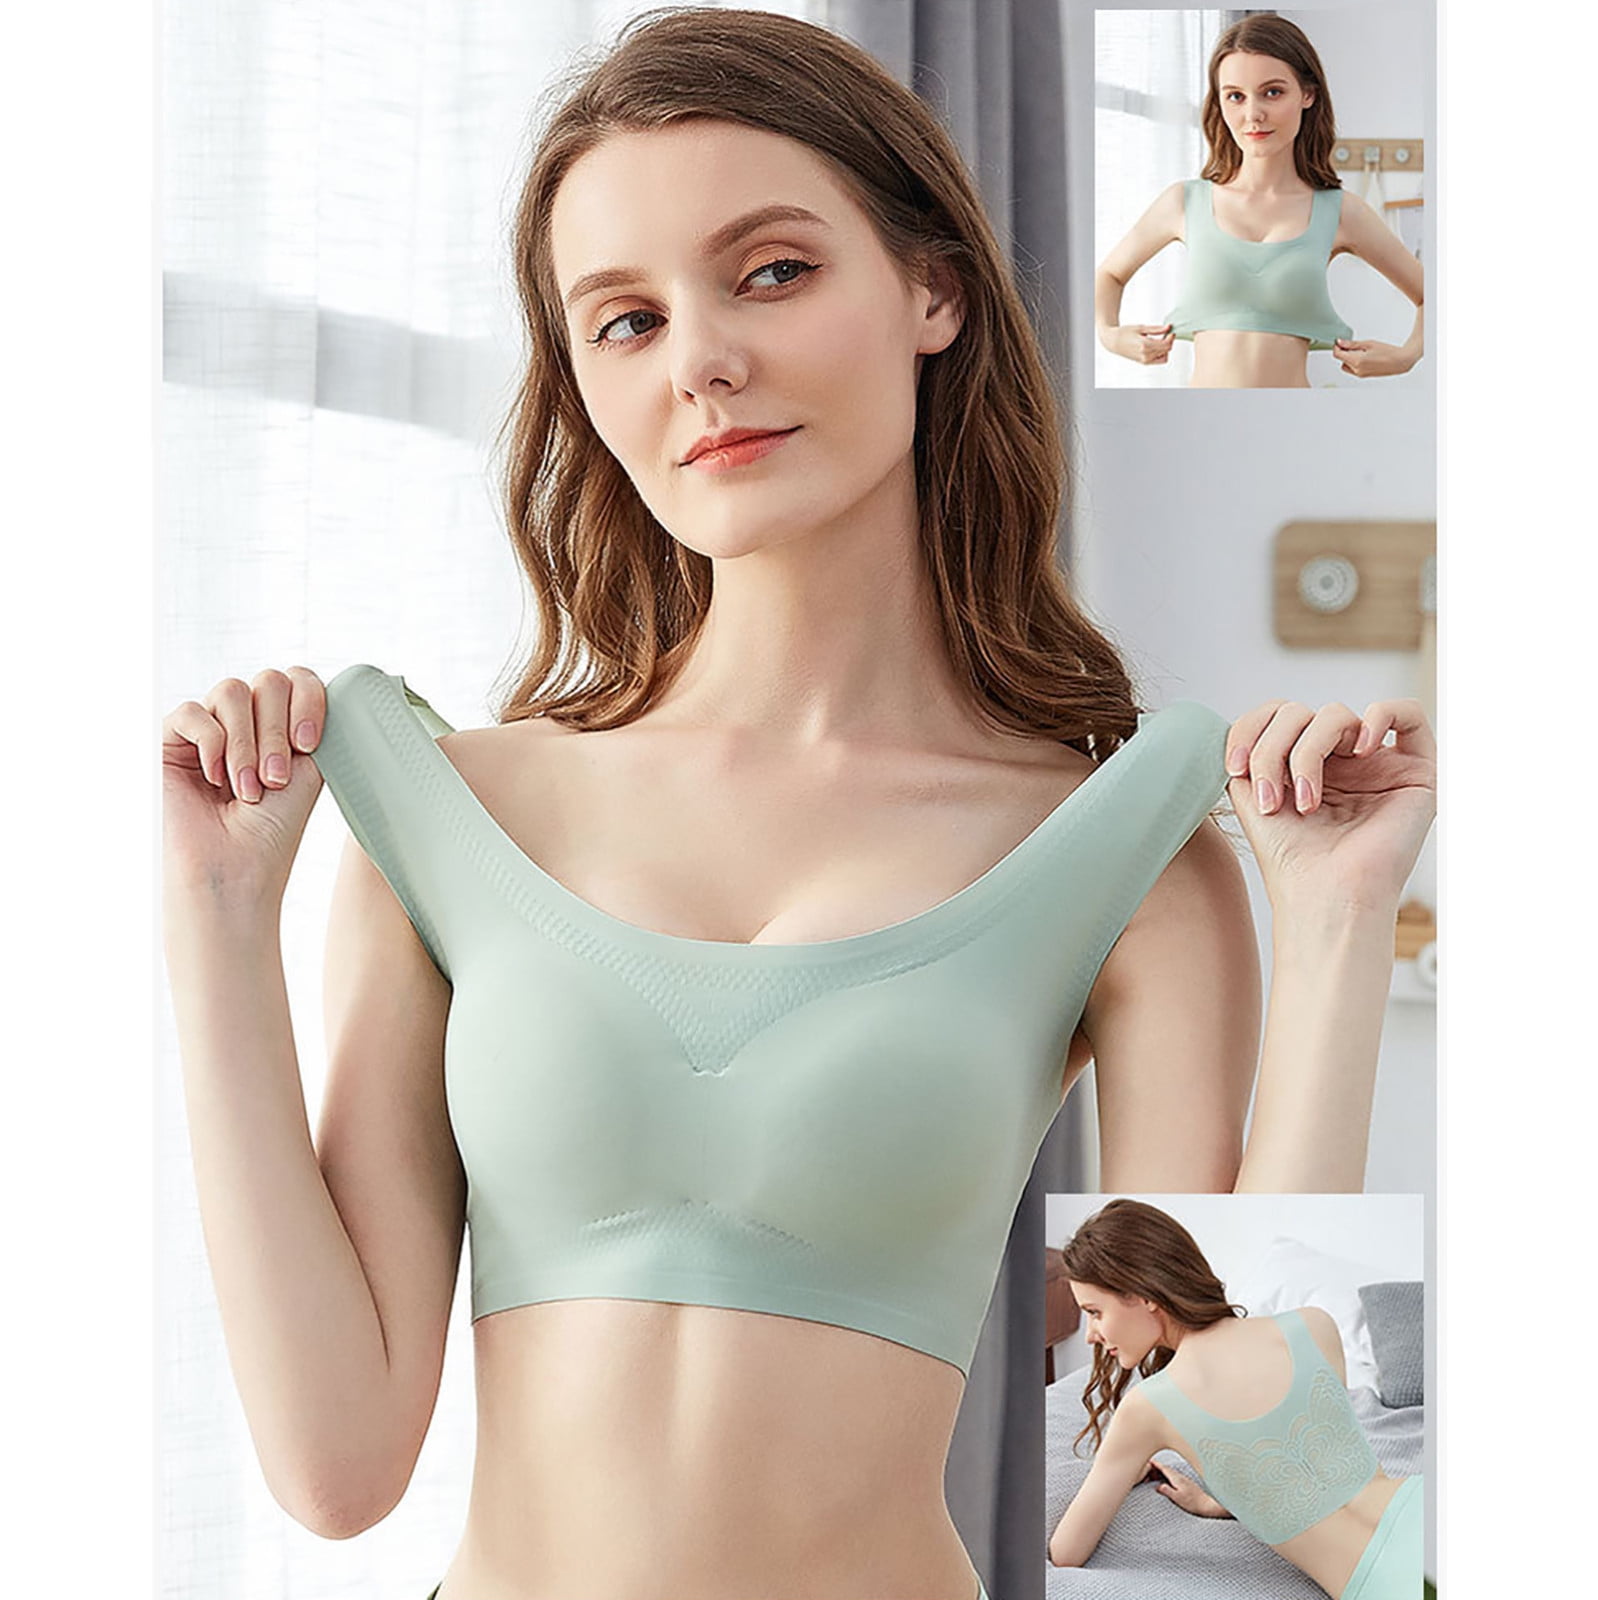 CAICJ98 Lingerie for Women Women's Wireless Bra with Cooling, Seamless  Smooth Comfort Wirefree T-Shirt Bra Green,L